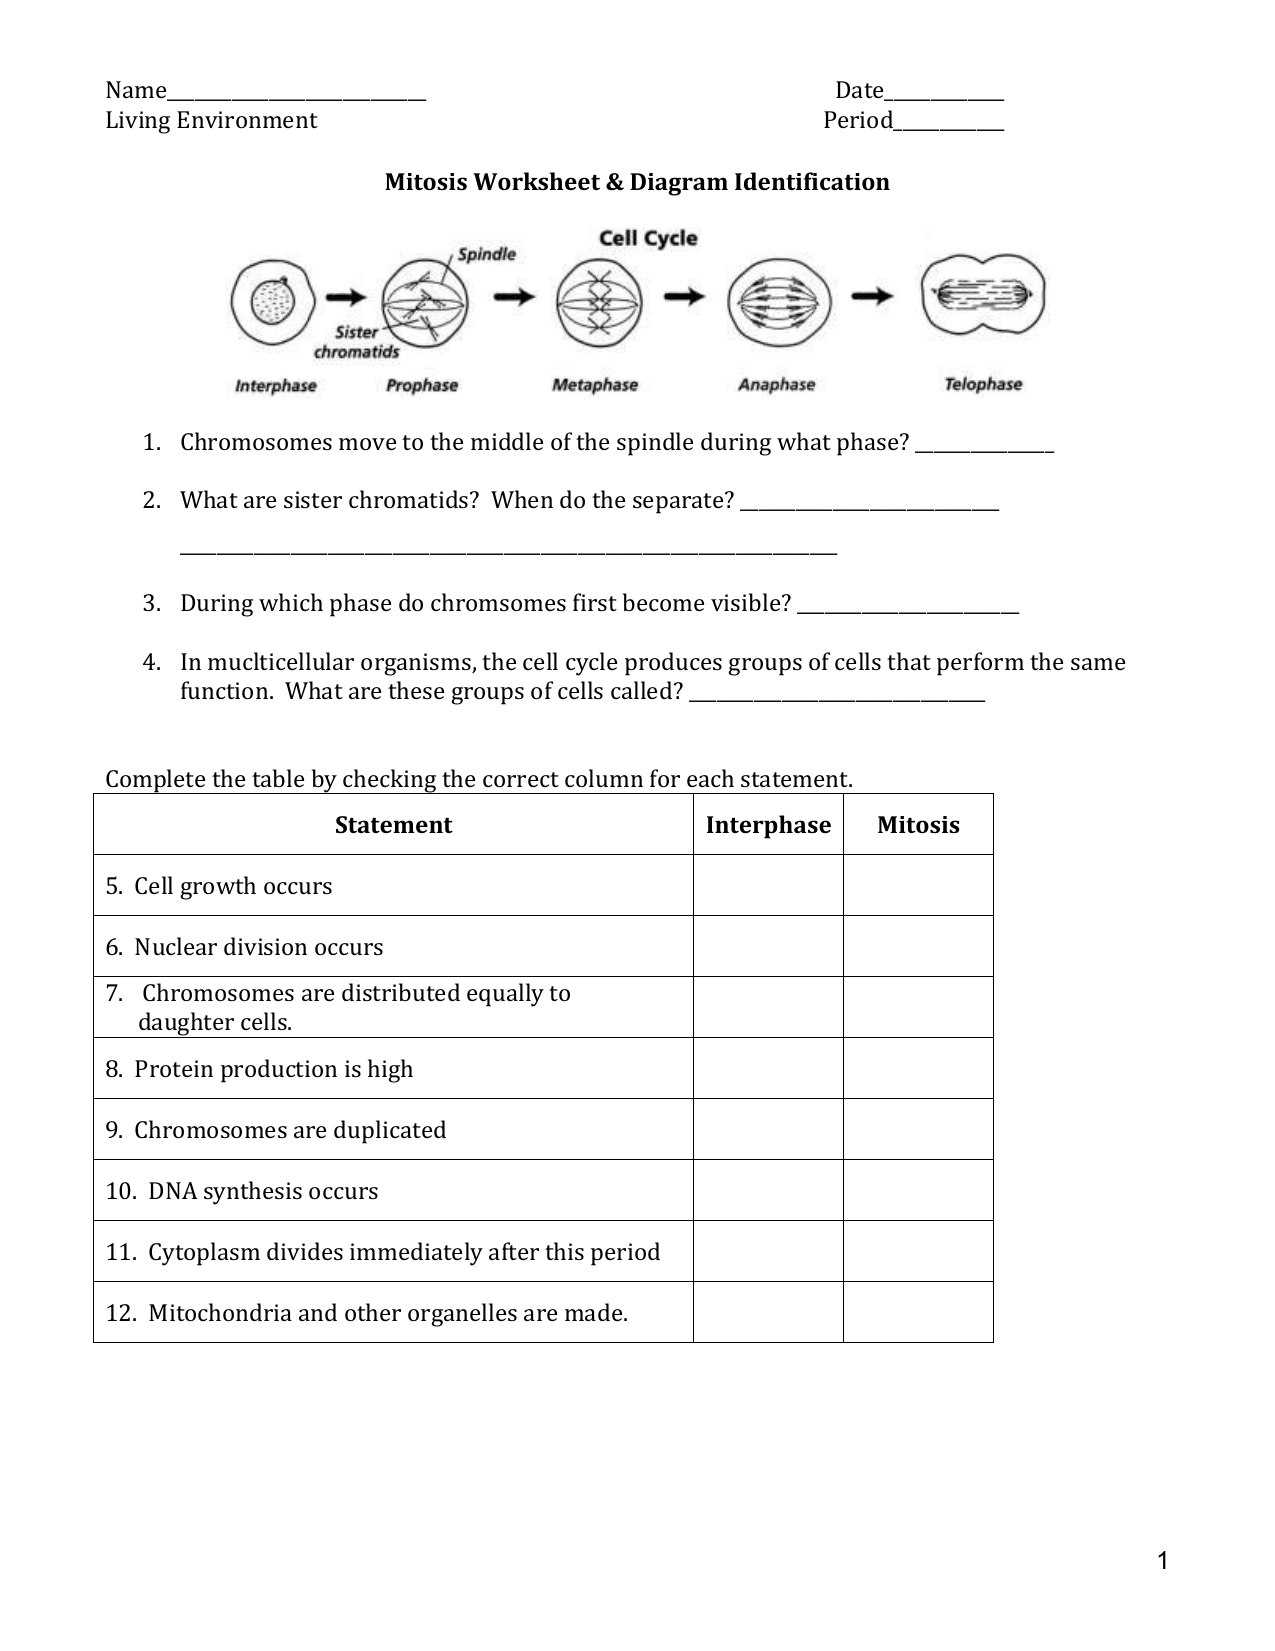 Mitosis Worksheet (20) With Regard To Cell Division Worksheet Answers